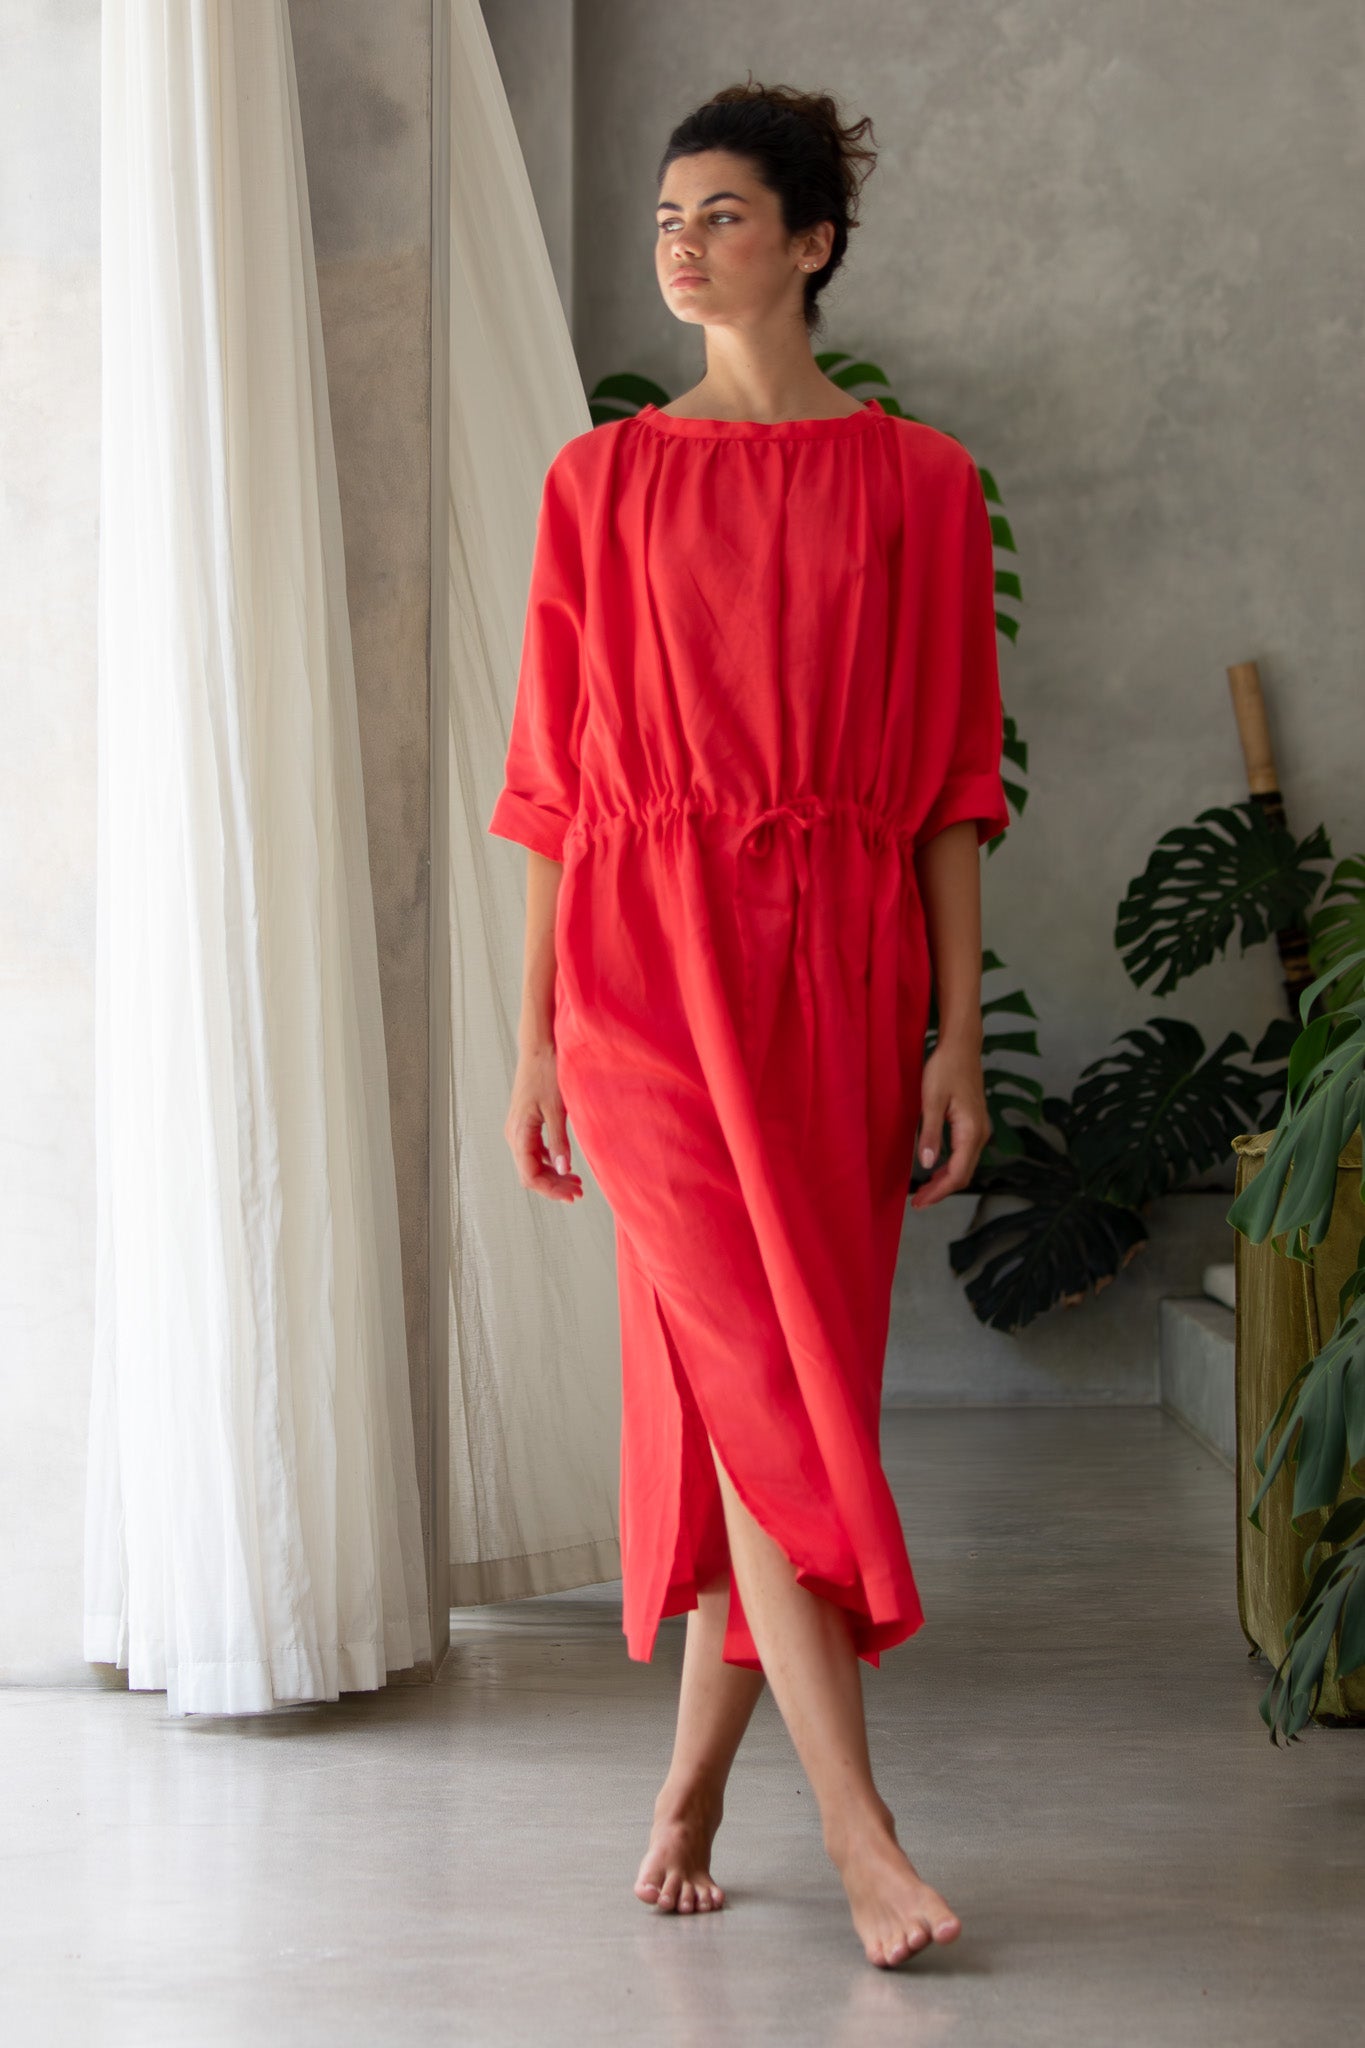 Model walking towards the camera wearing a luxury red linen dress from designer label The Boy&I